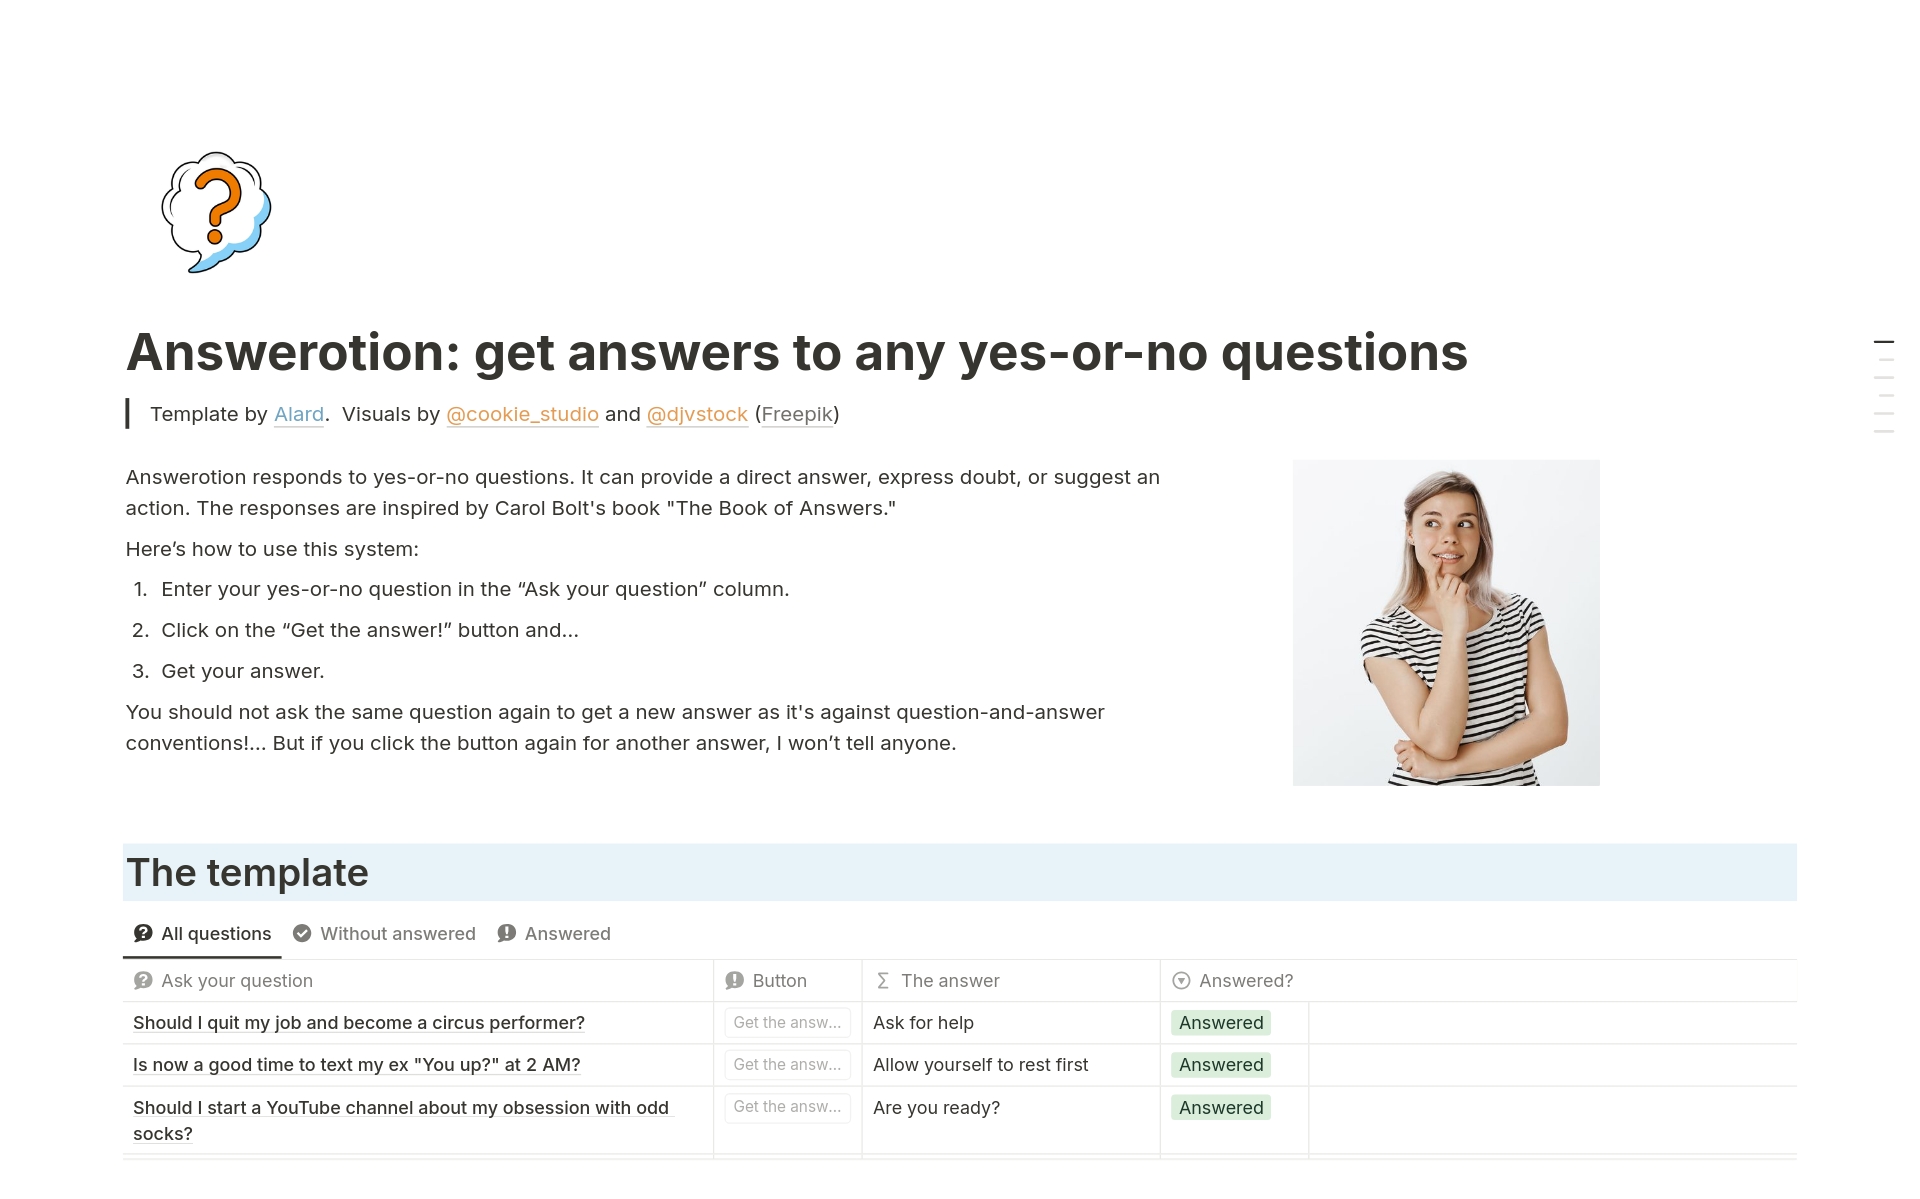 Answerotion: get answers to yes-or-no questionsのテンプレートのプレビュー